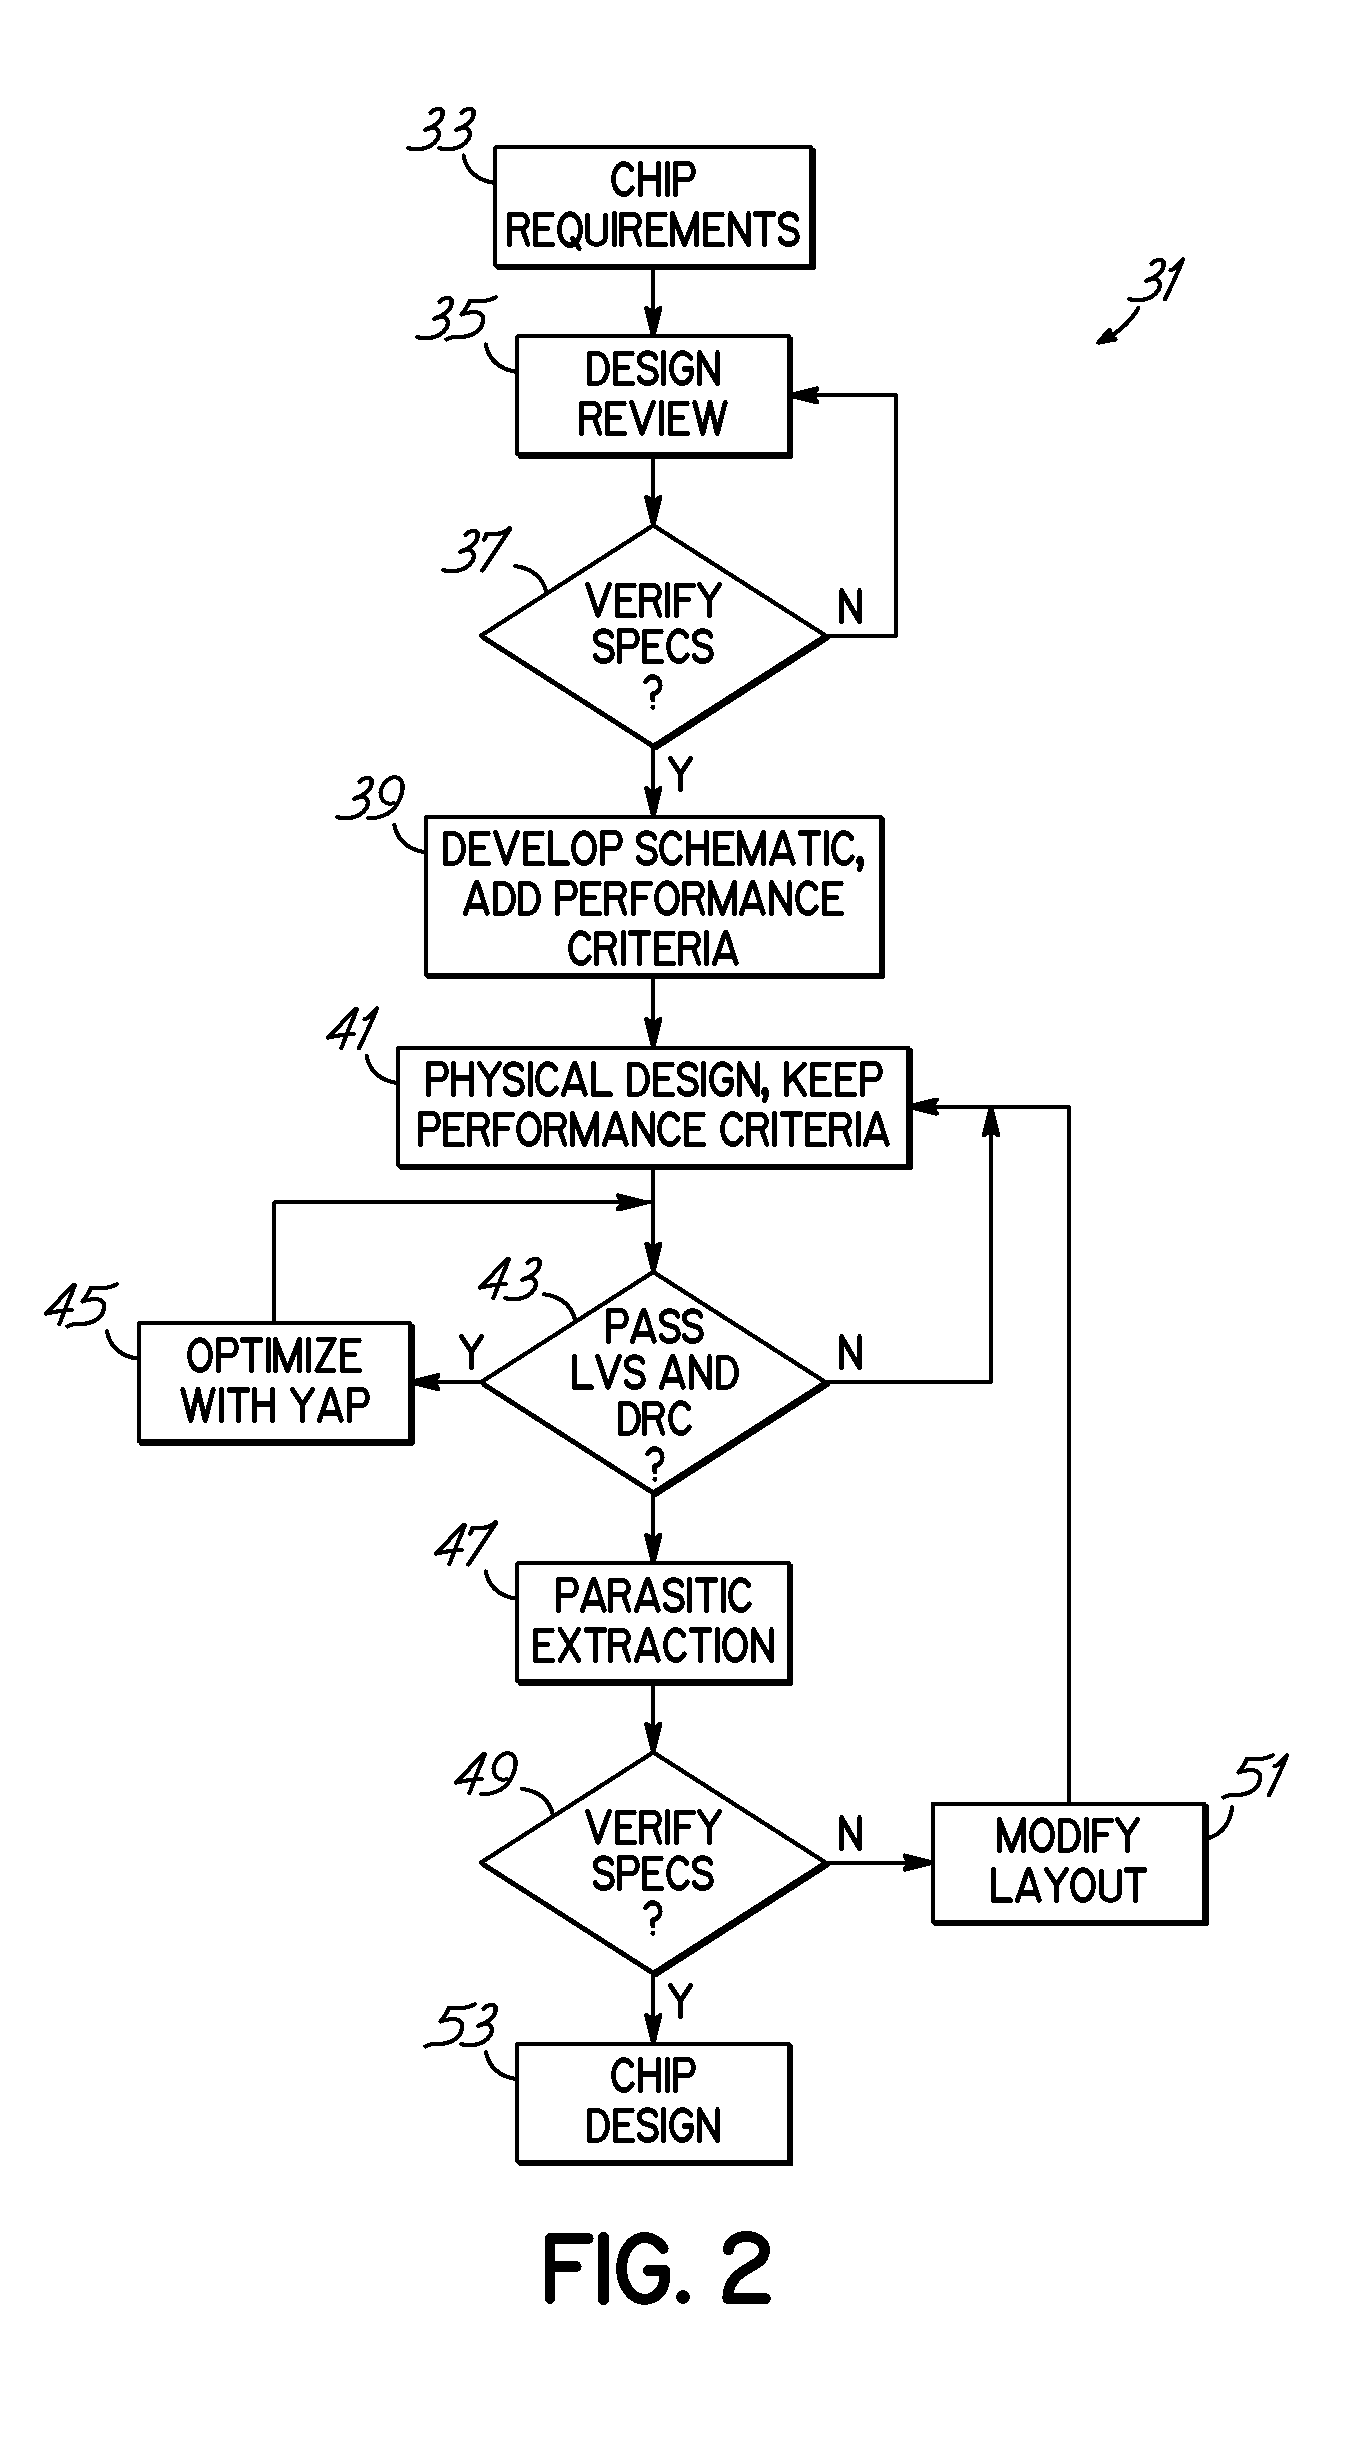 Variable Performance Ranking and Modification in Design for Manufacturability of Circuits